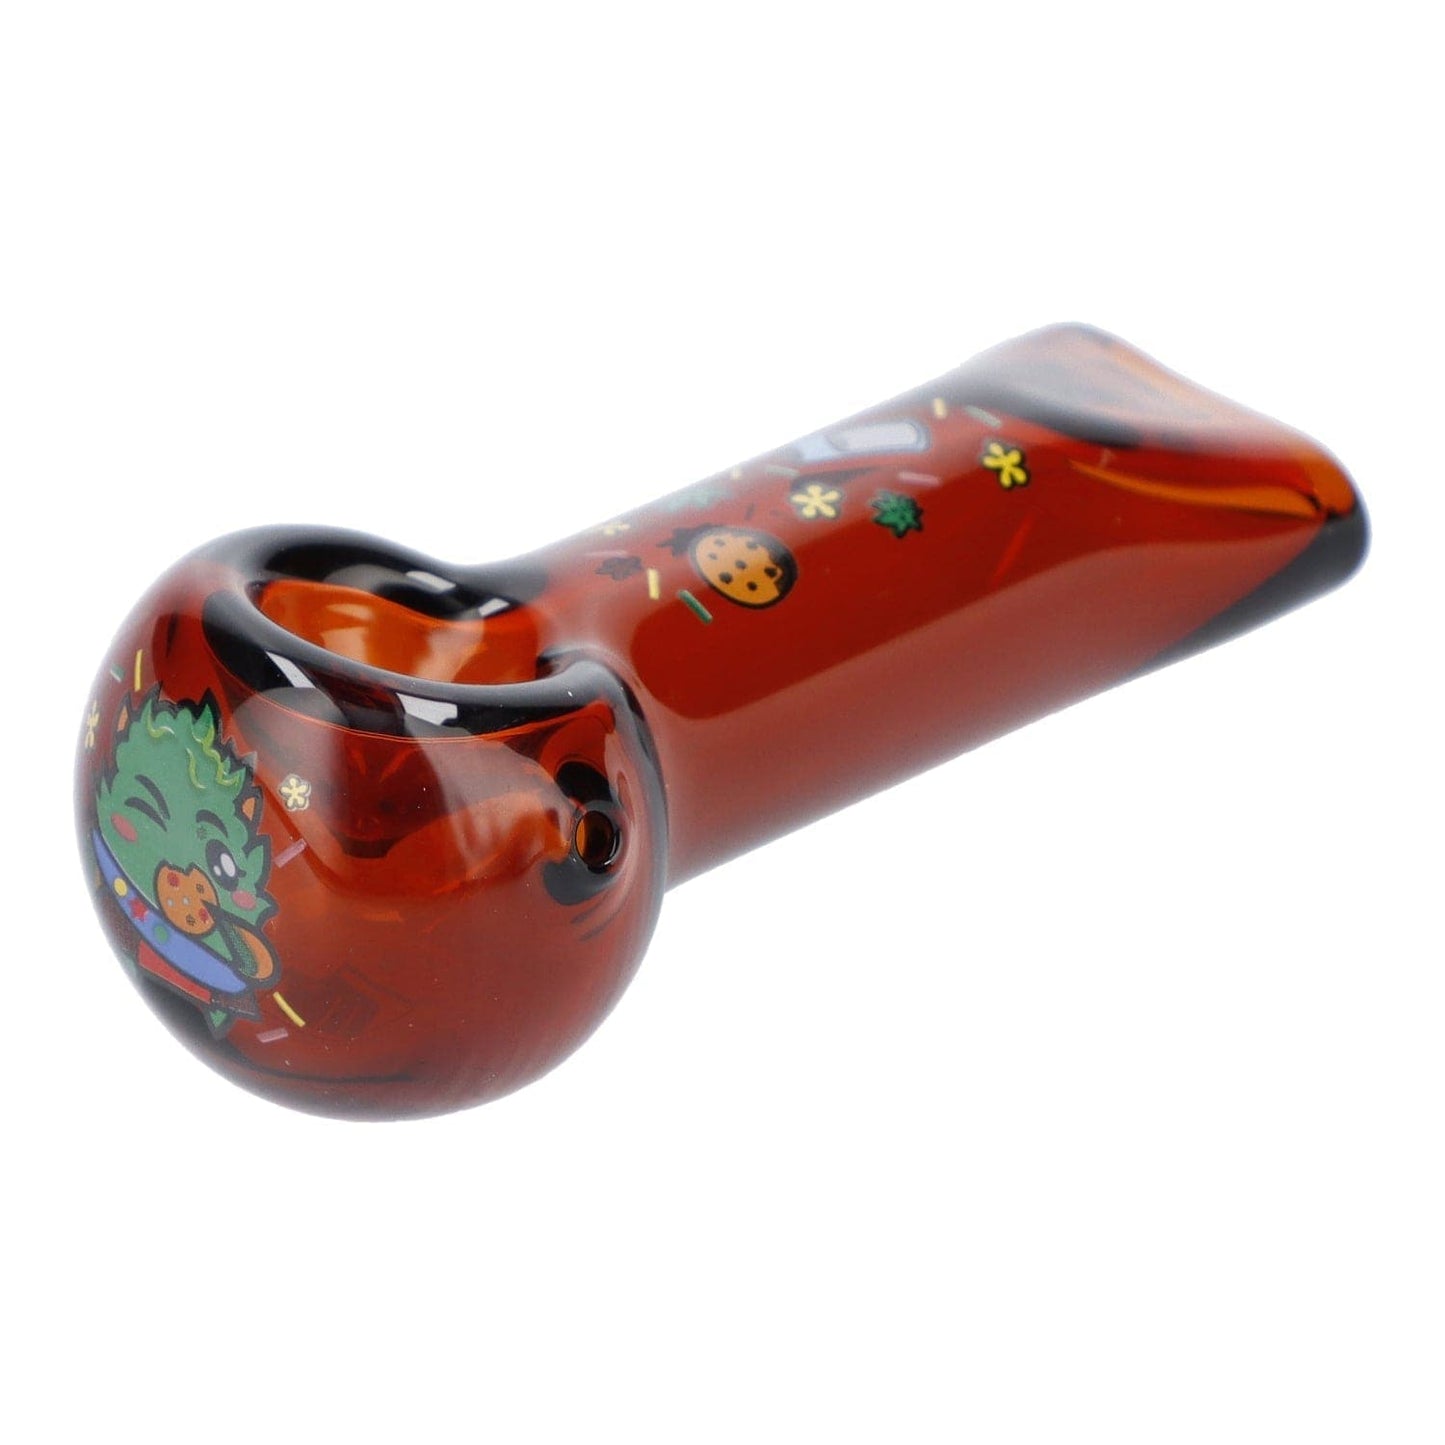 Wido Hand Pipe 4" GSC Hand Pipe - Transparent Amber